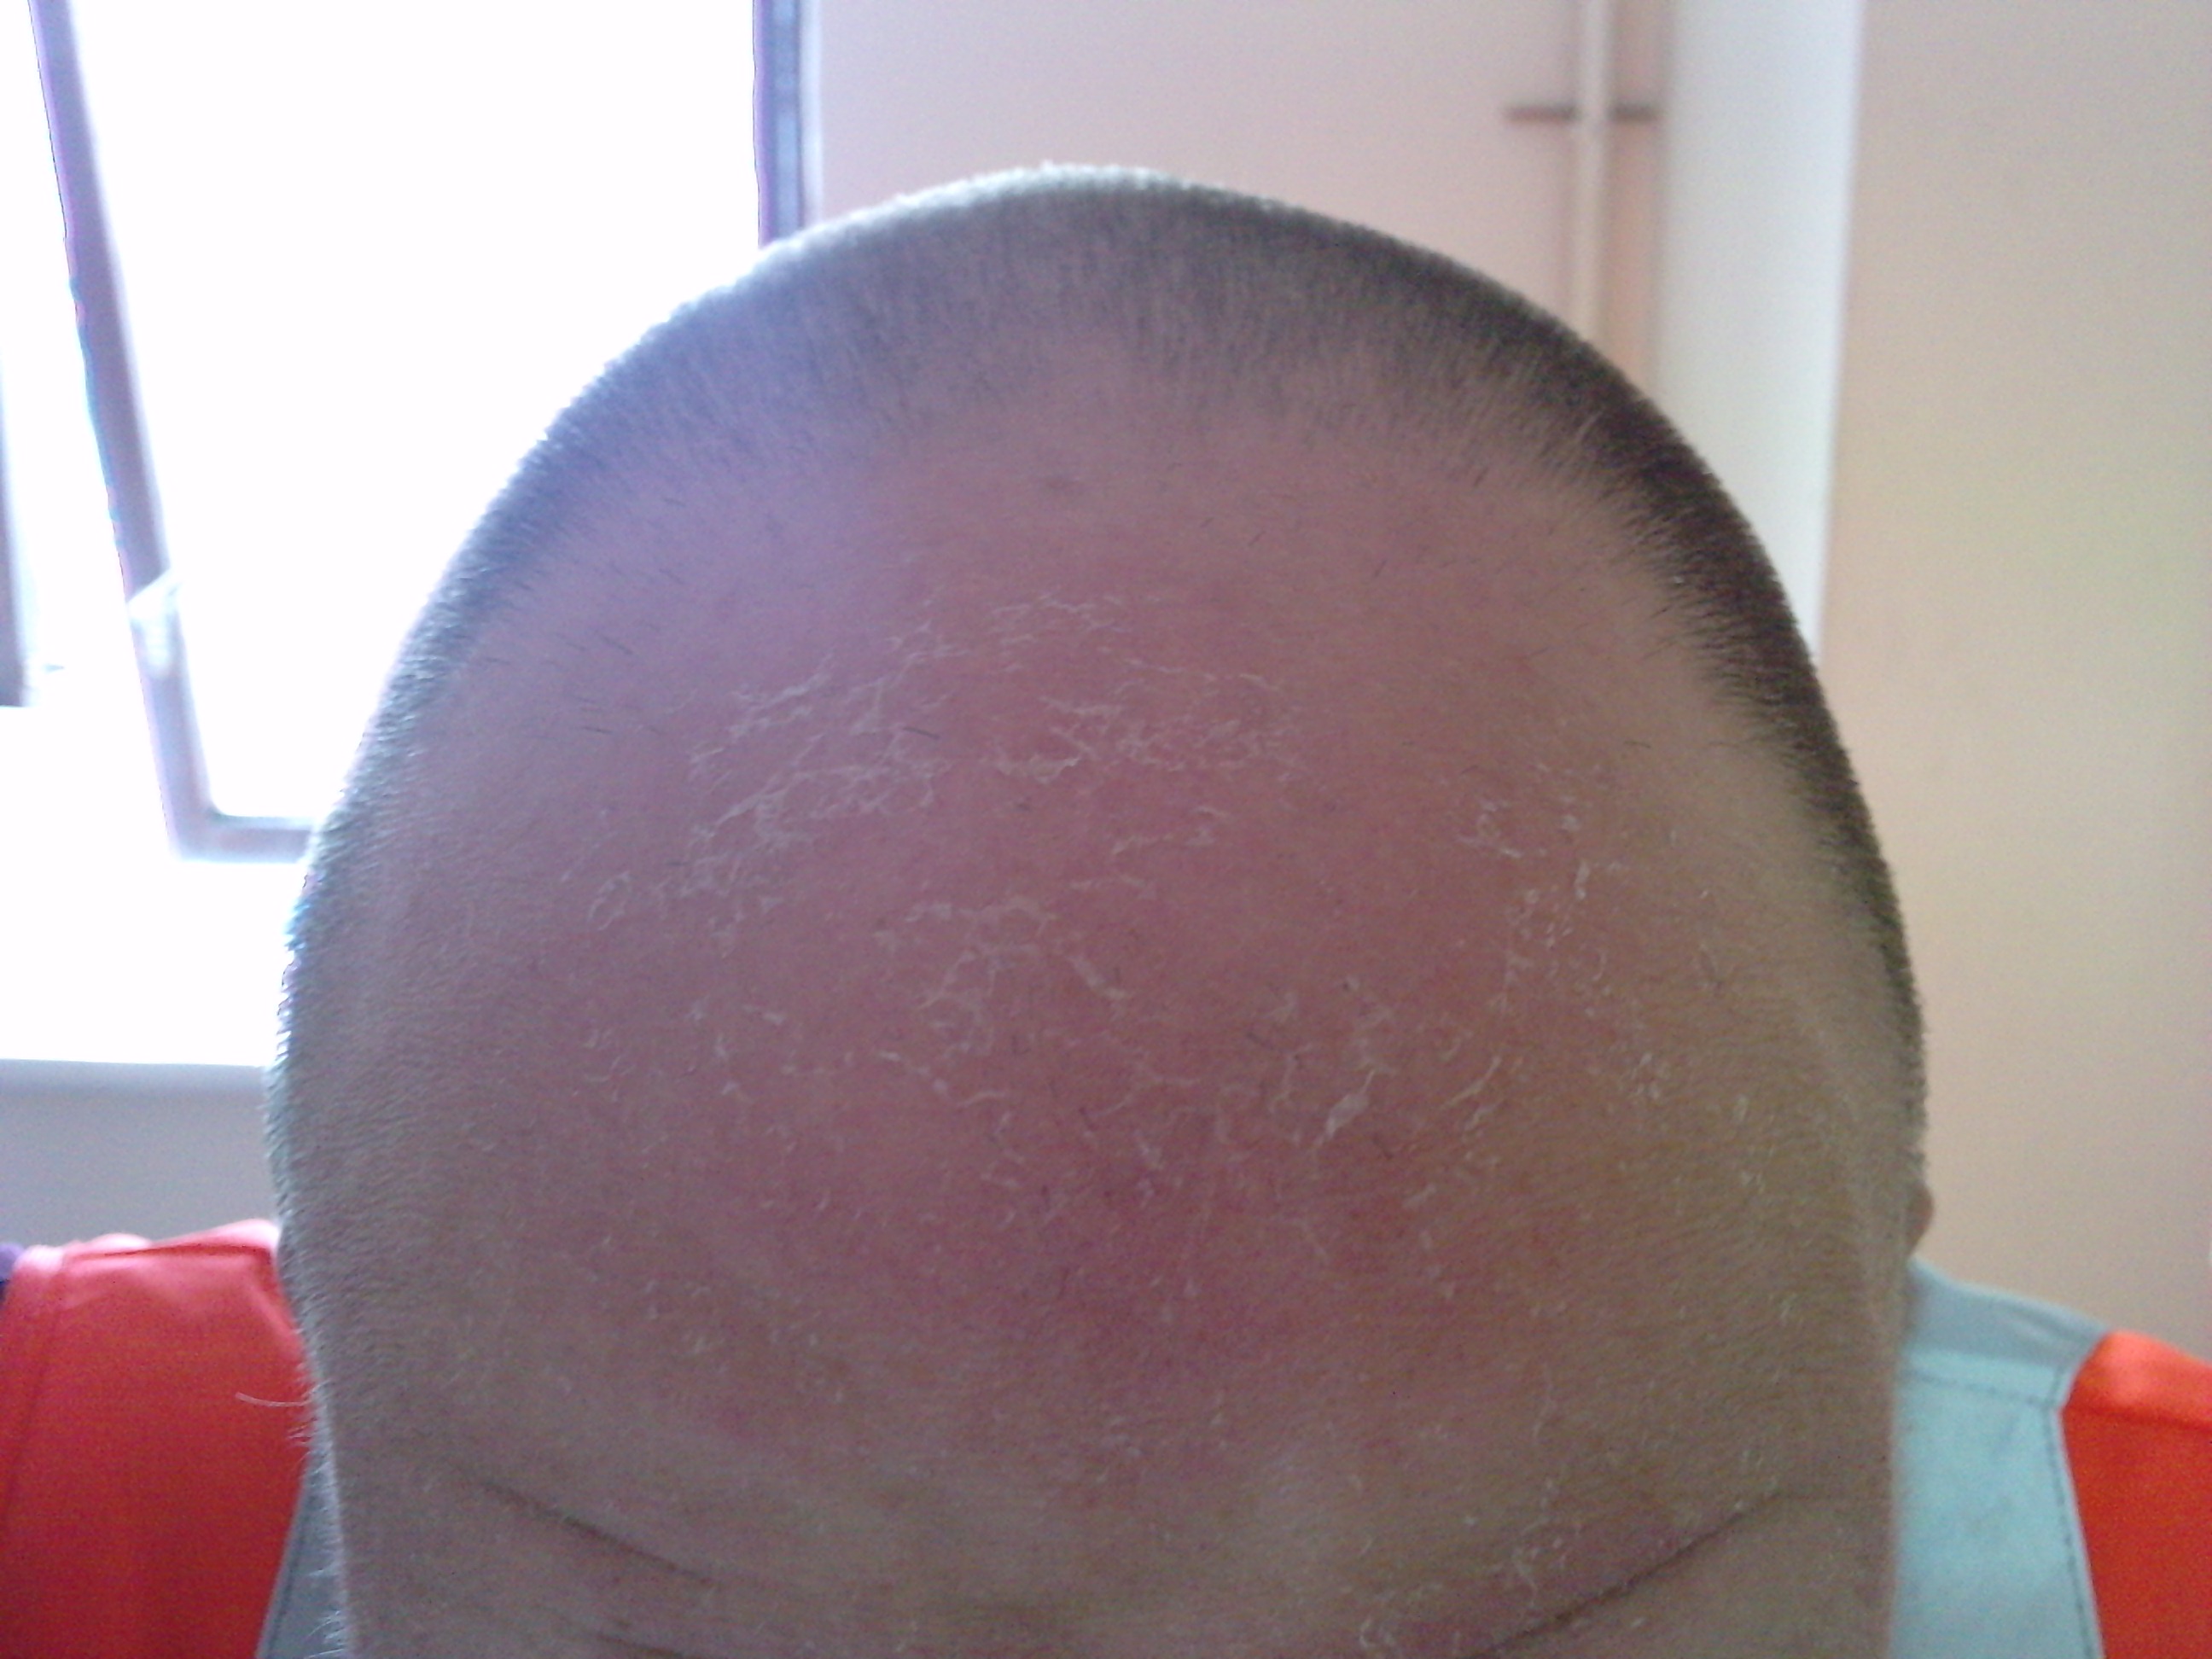 balding 32 year old storeman looking forward to whinging about my workplace!